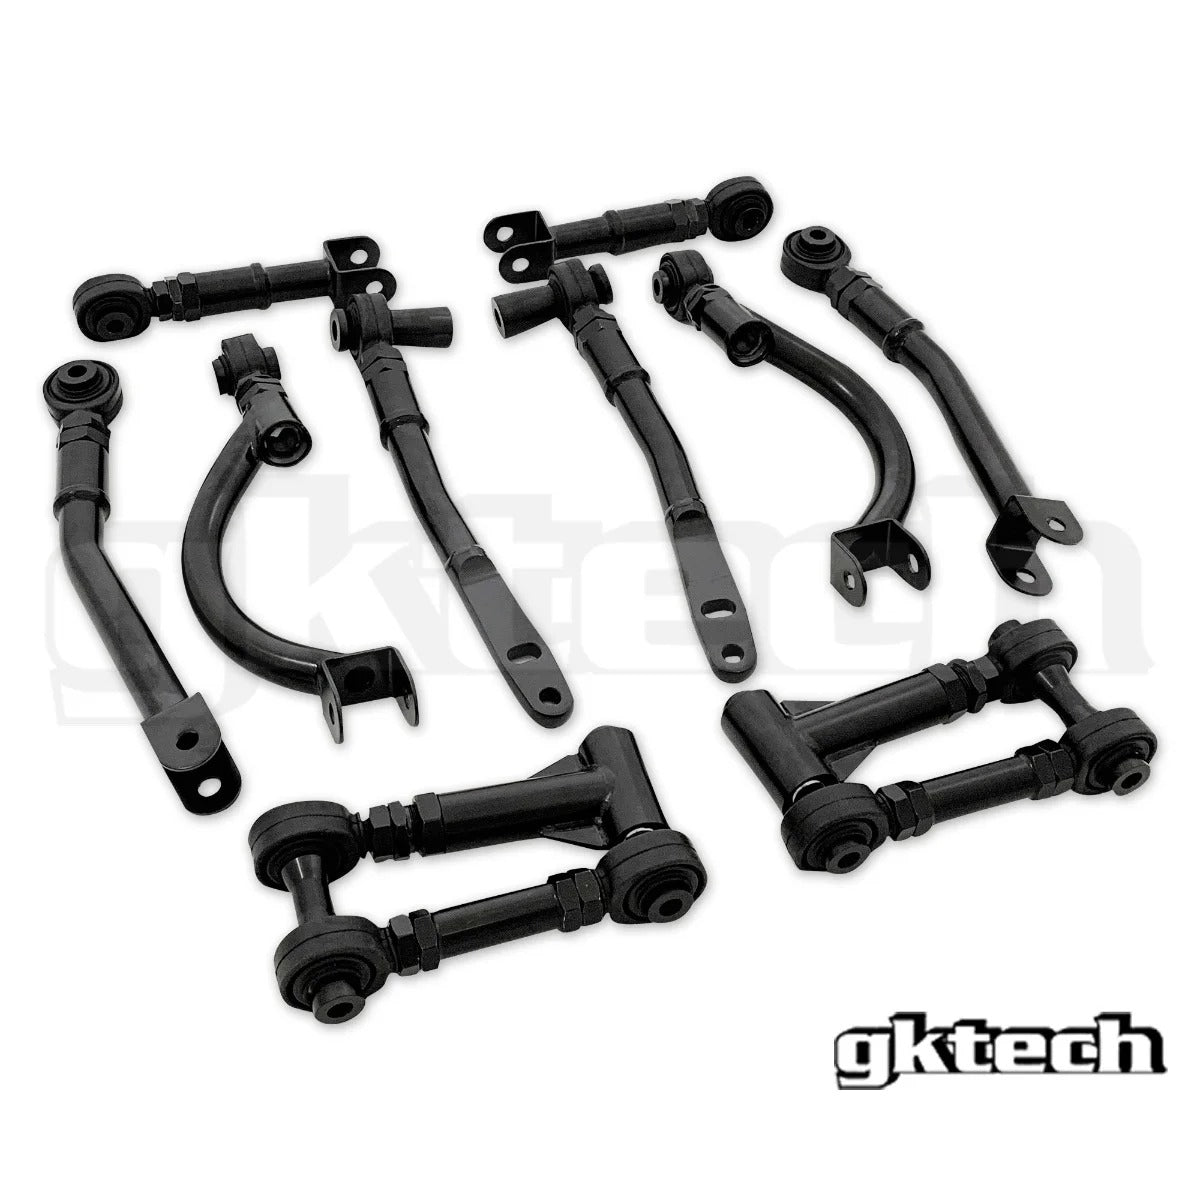 R32 Skyline Suspension arm package (10% combo discount)